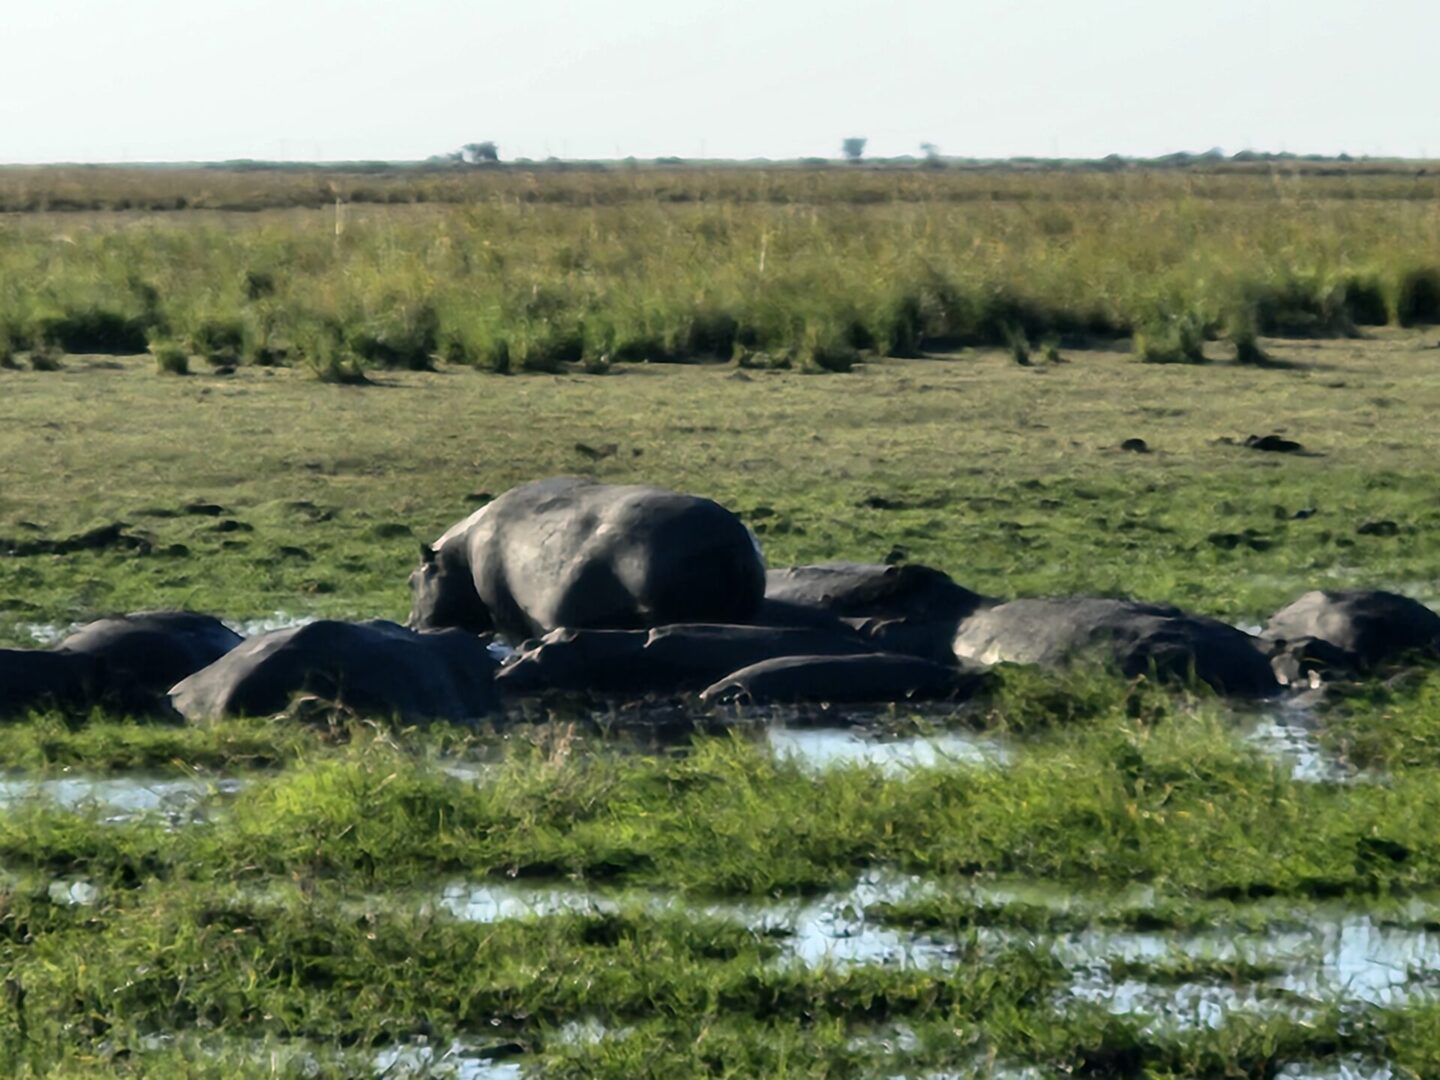 A herd of elephants laying on top of rocks.